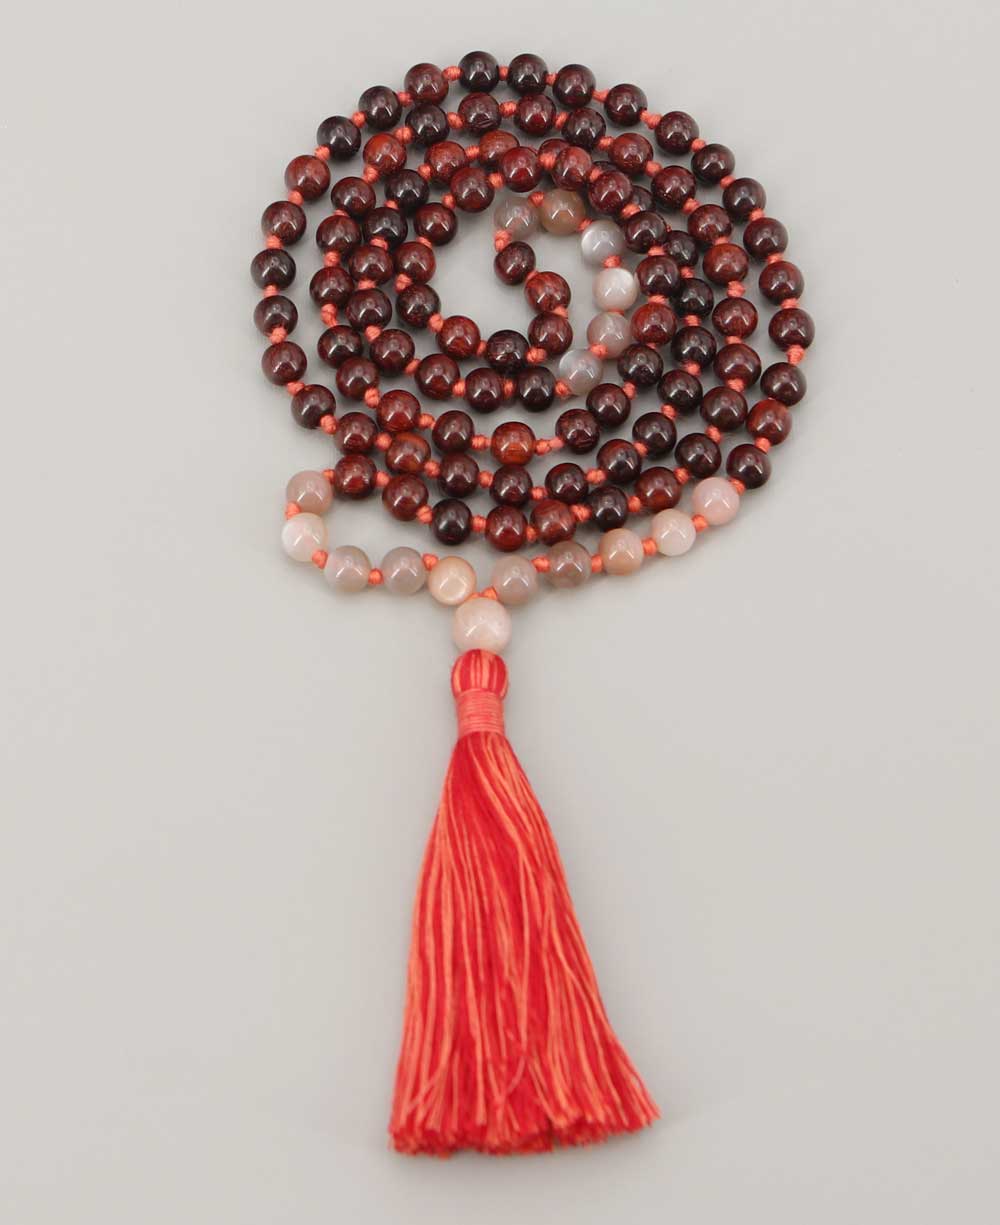 Rosewood and Peach Moonstone 108 Beads Meditation Mala, Knotted - Prayer Beads